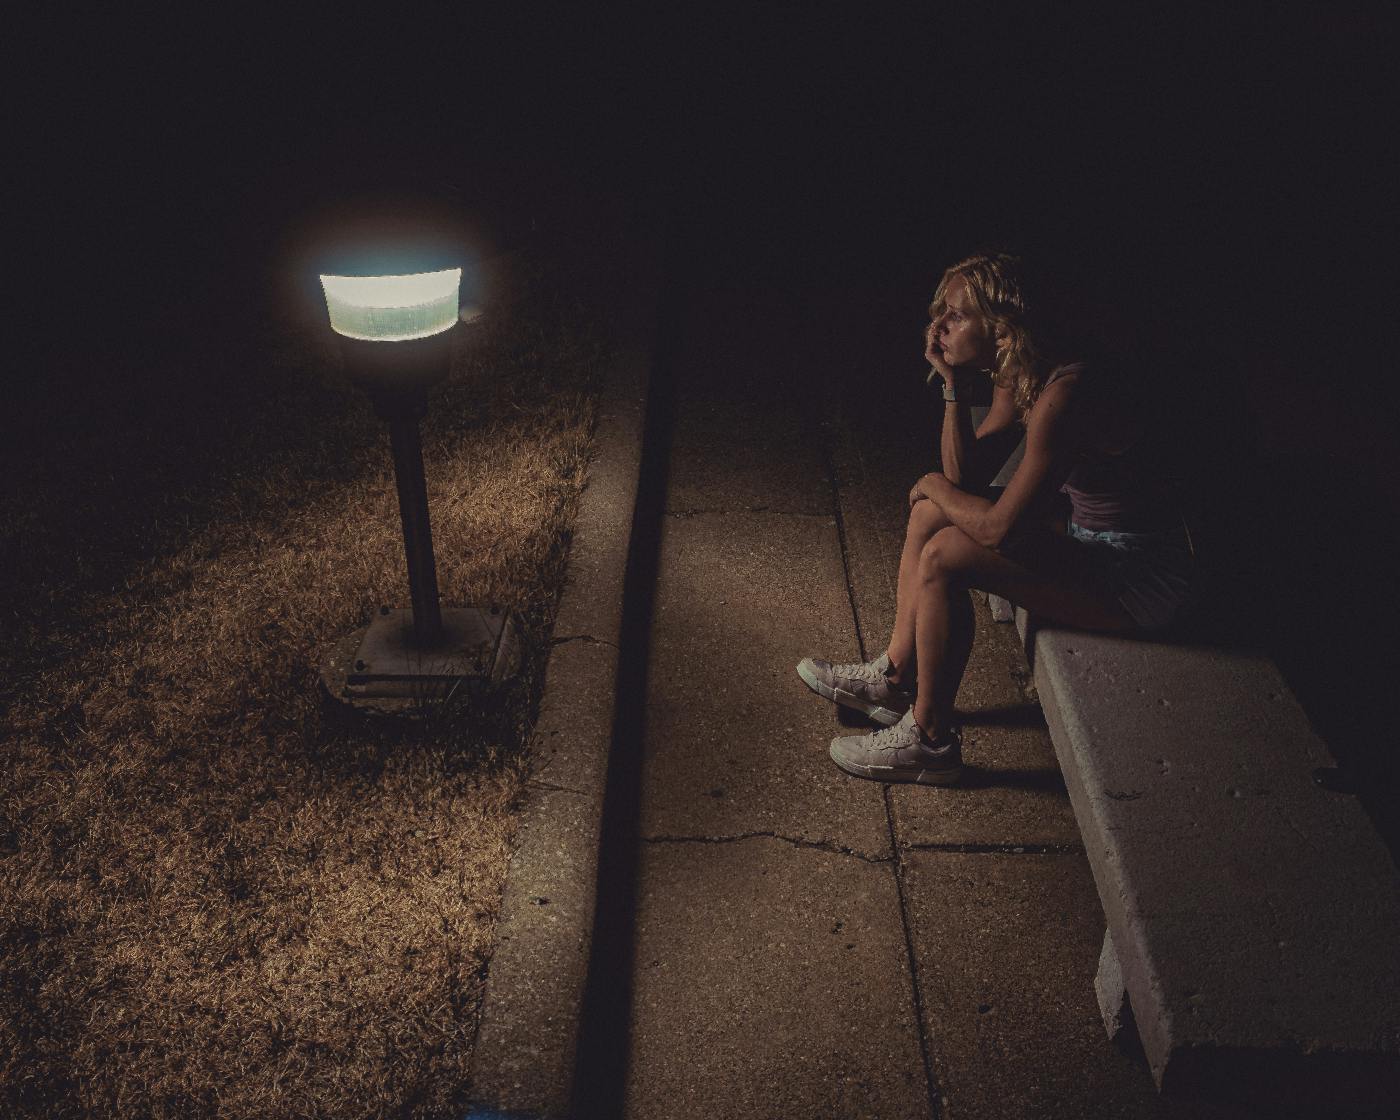 Night, a woman alone sits on a stone bench in front of a pathway light pondering life